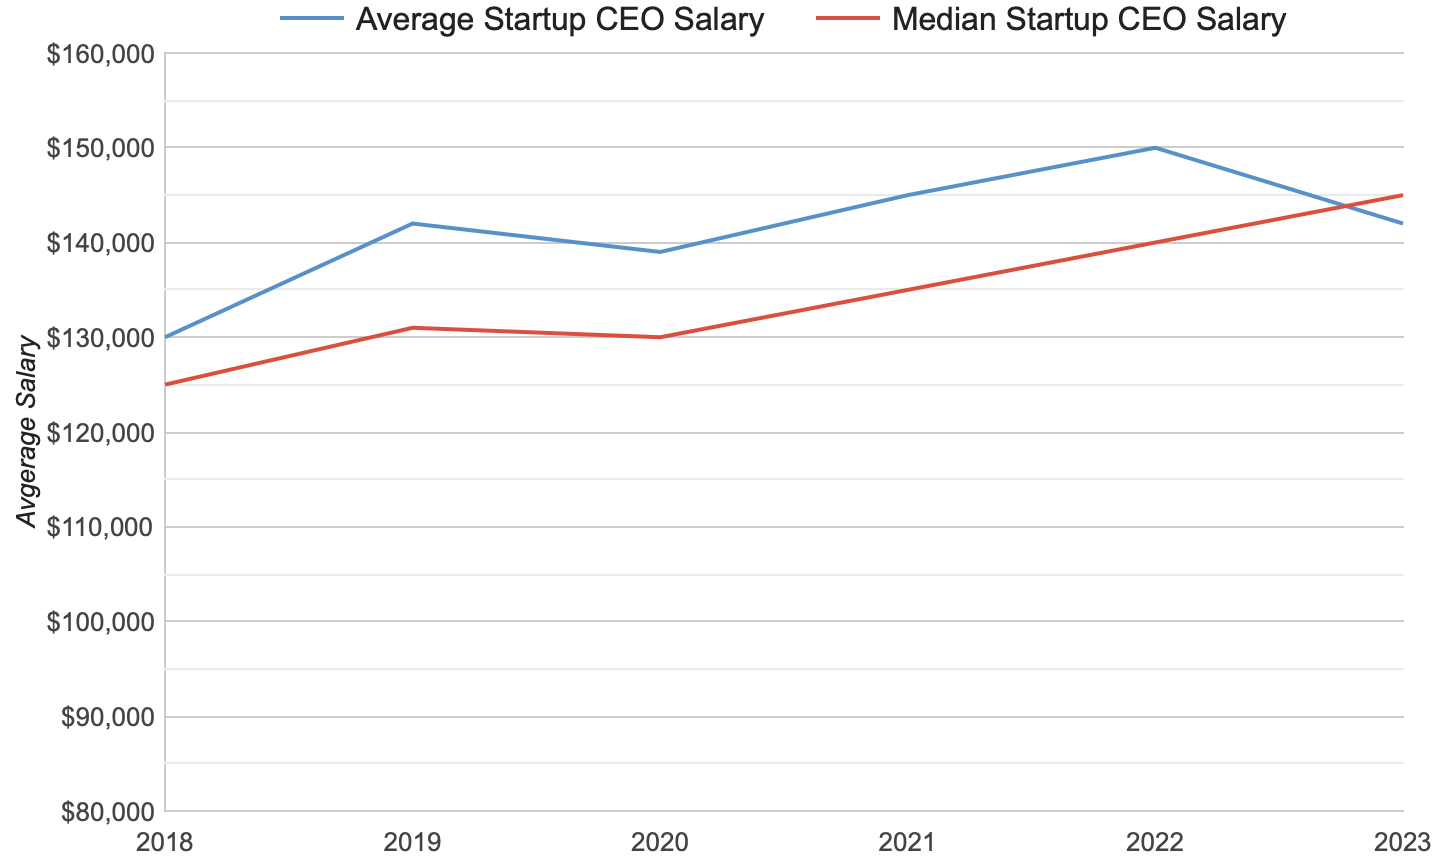 Average Startup CEO Salary - 2018 to 2023